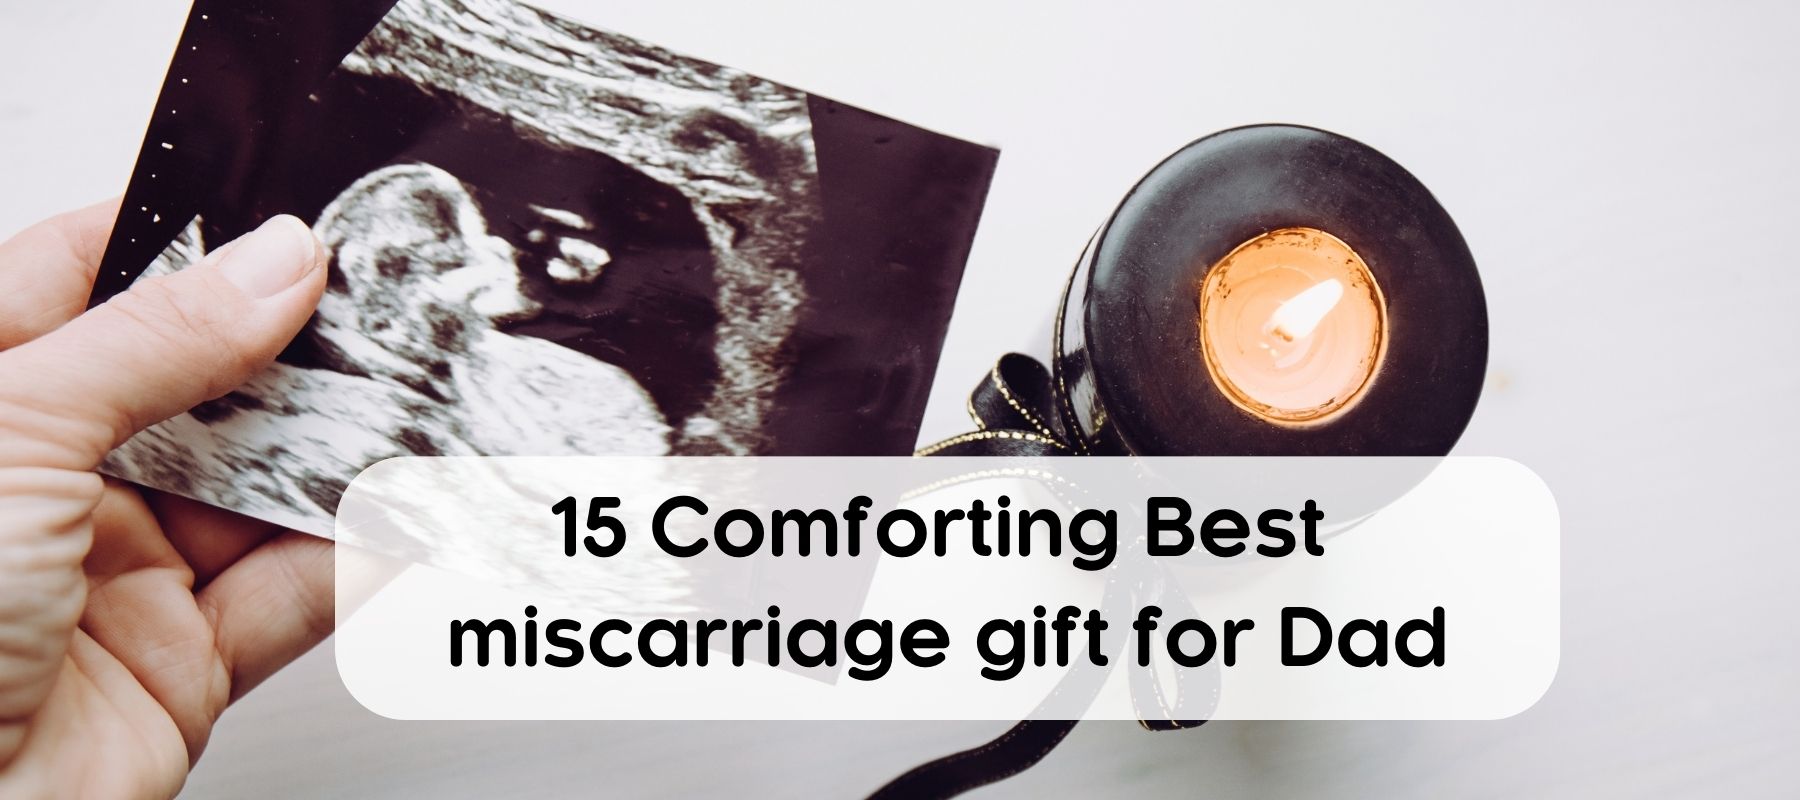 Miscarriage-gift-for-dad